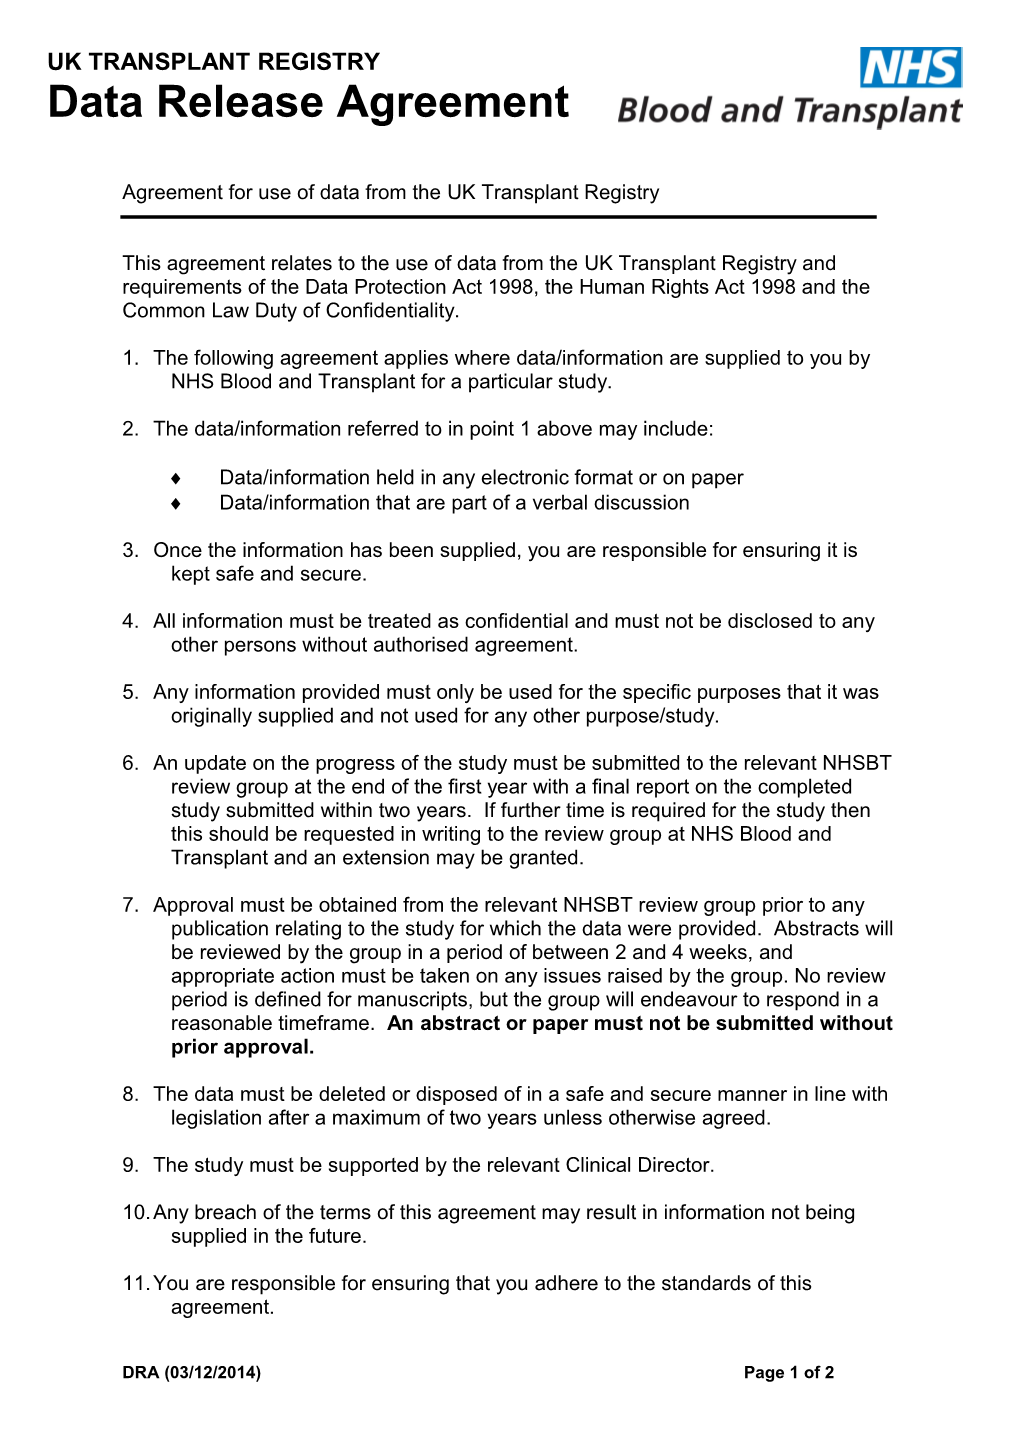 Agreement for Use of Data from the UK Transplant Registry